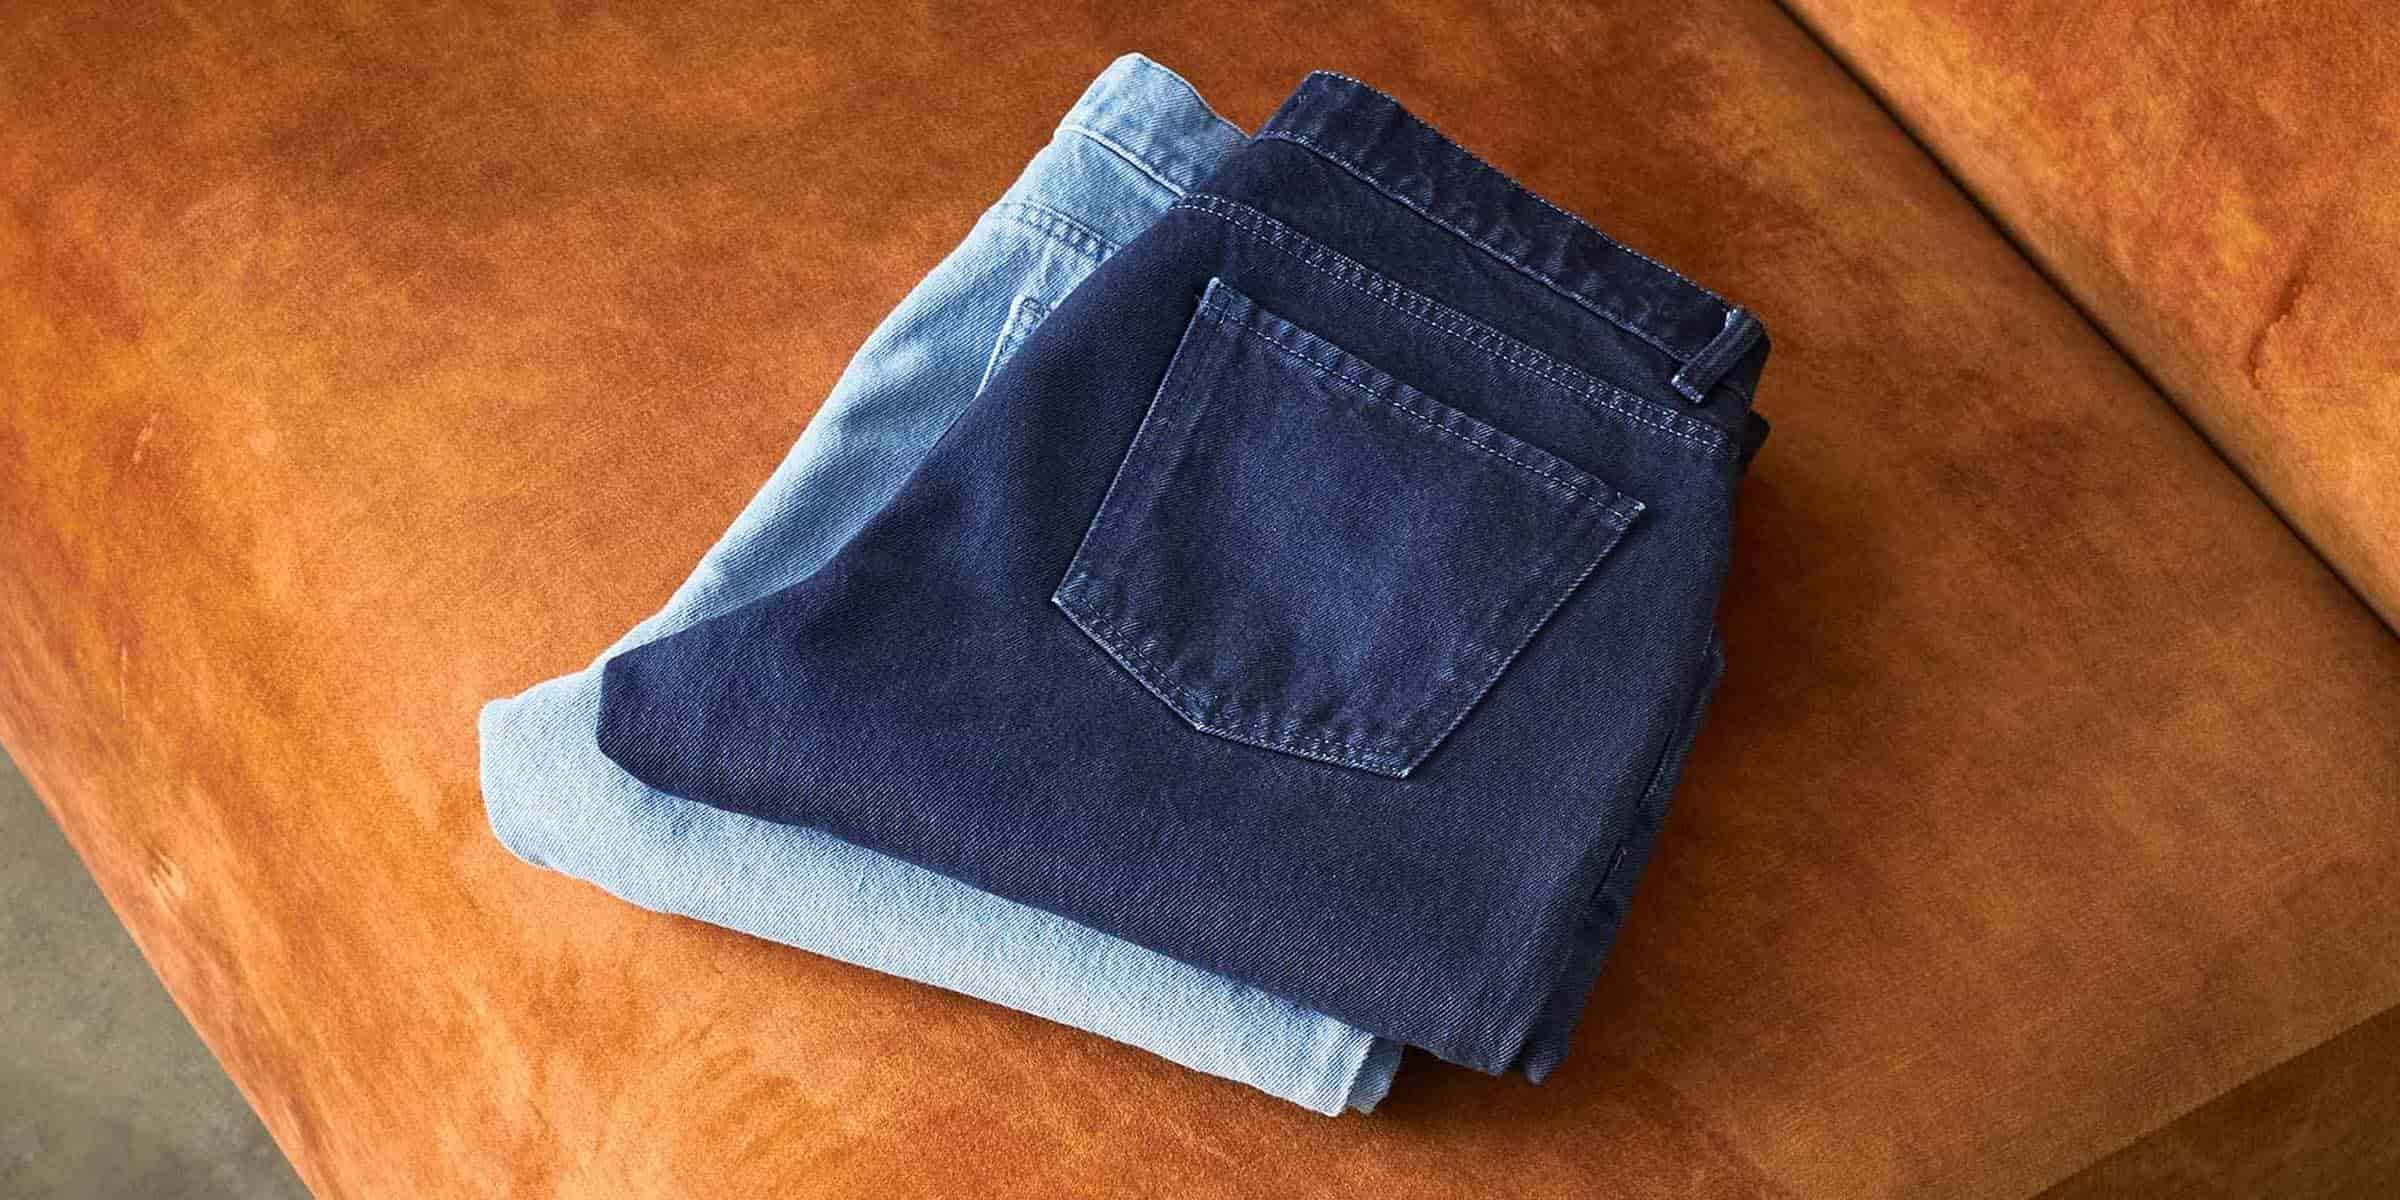 23 Best Jeans Brands For Cool Quality Denim (Guide)